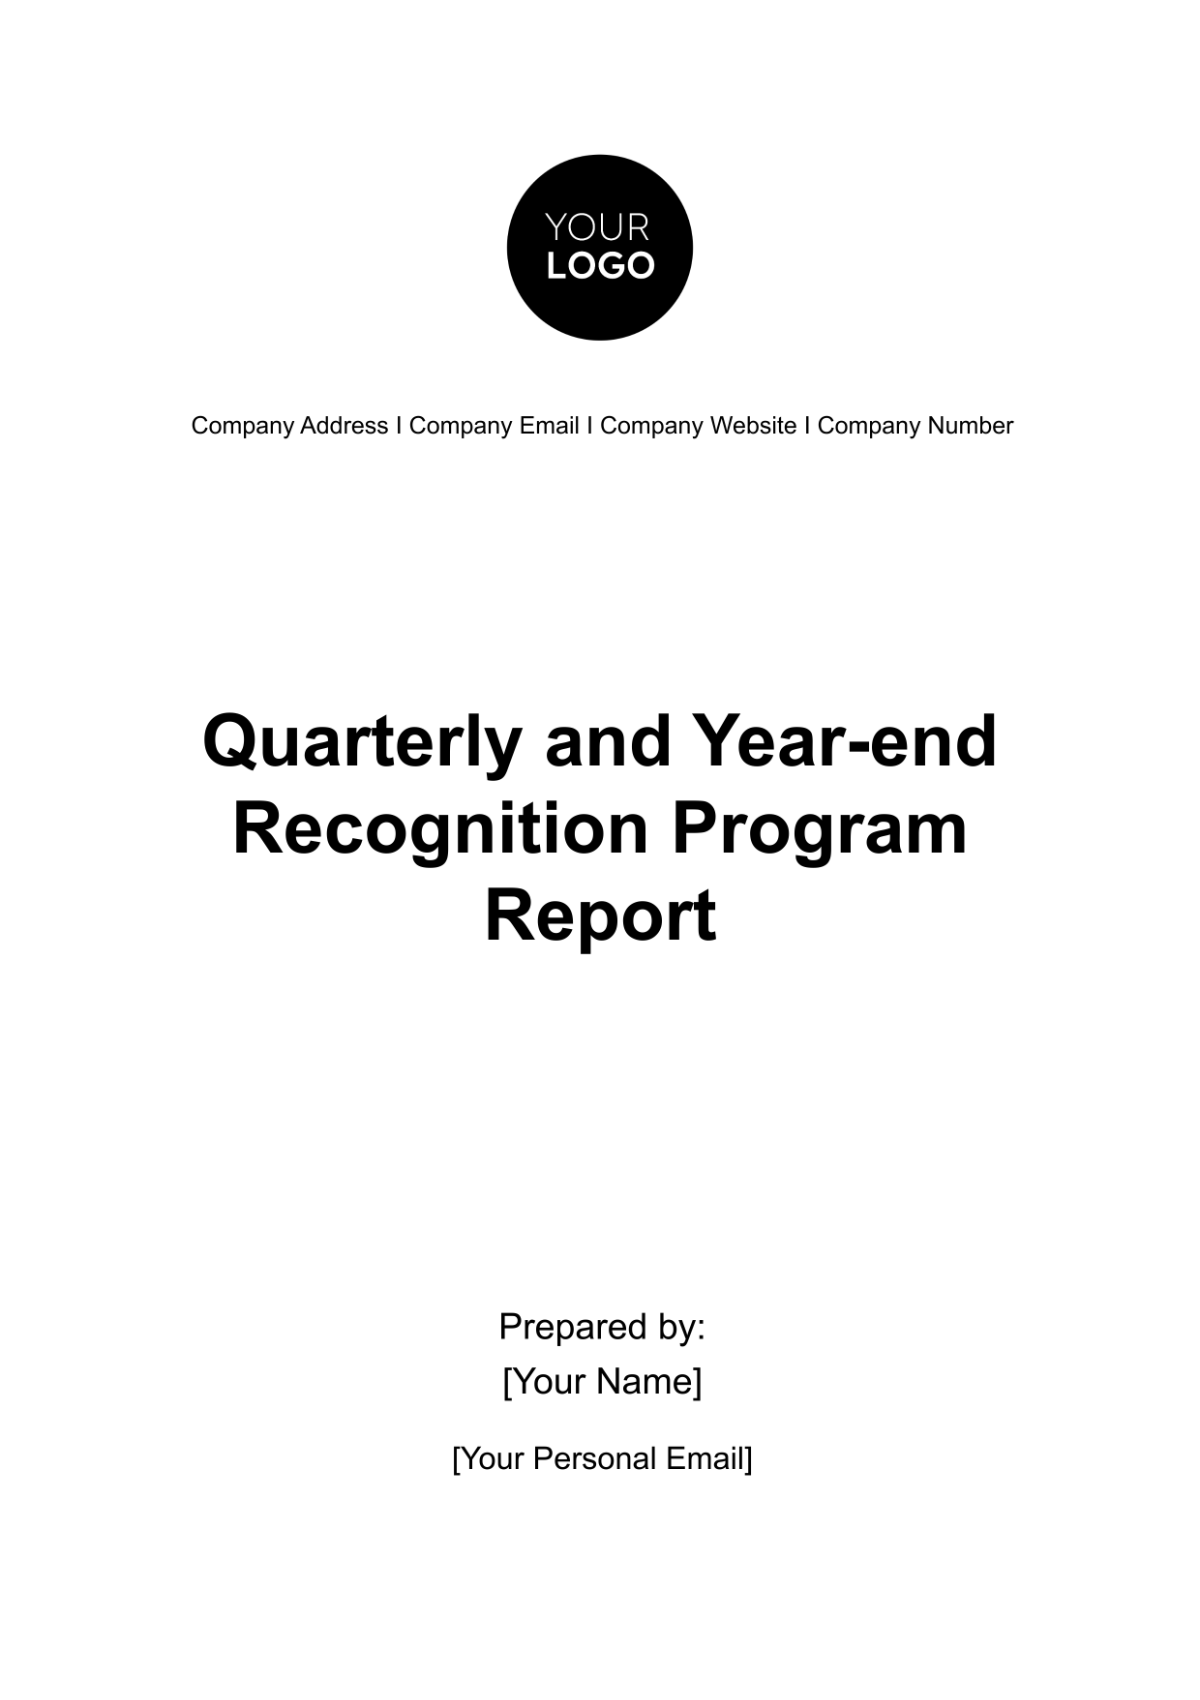 Free Quarterly and Year-end Recognition Program Report HR Template